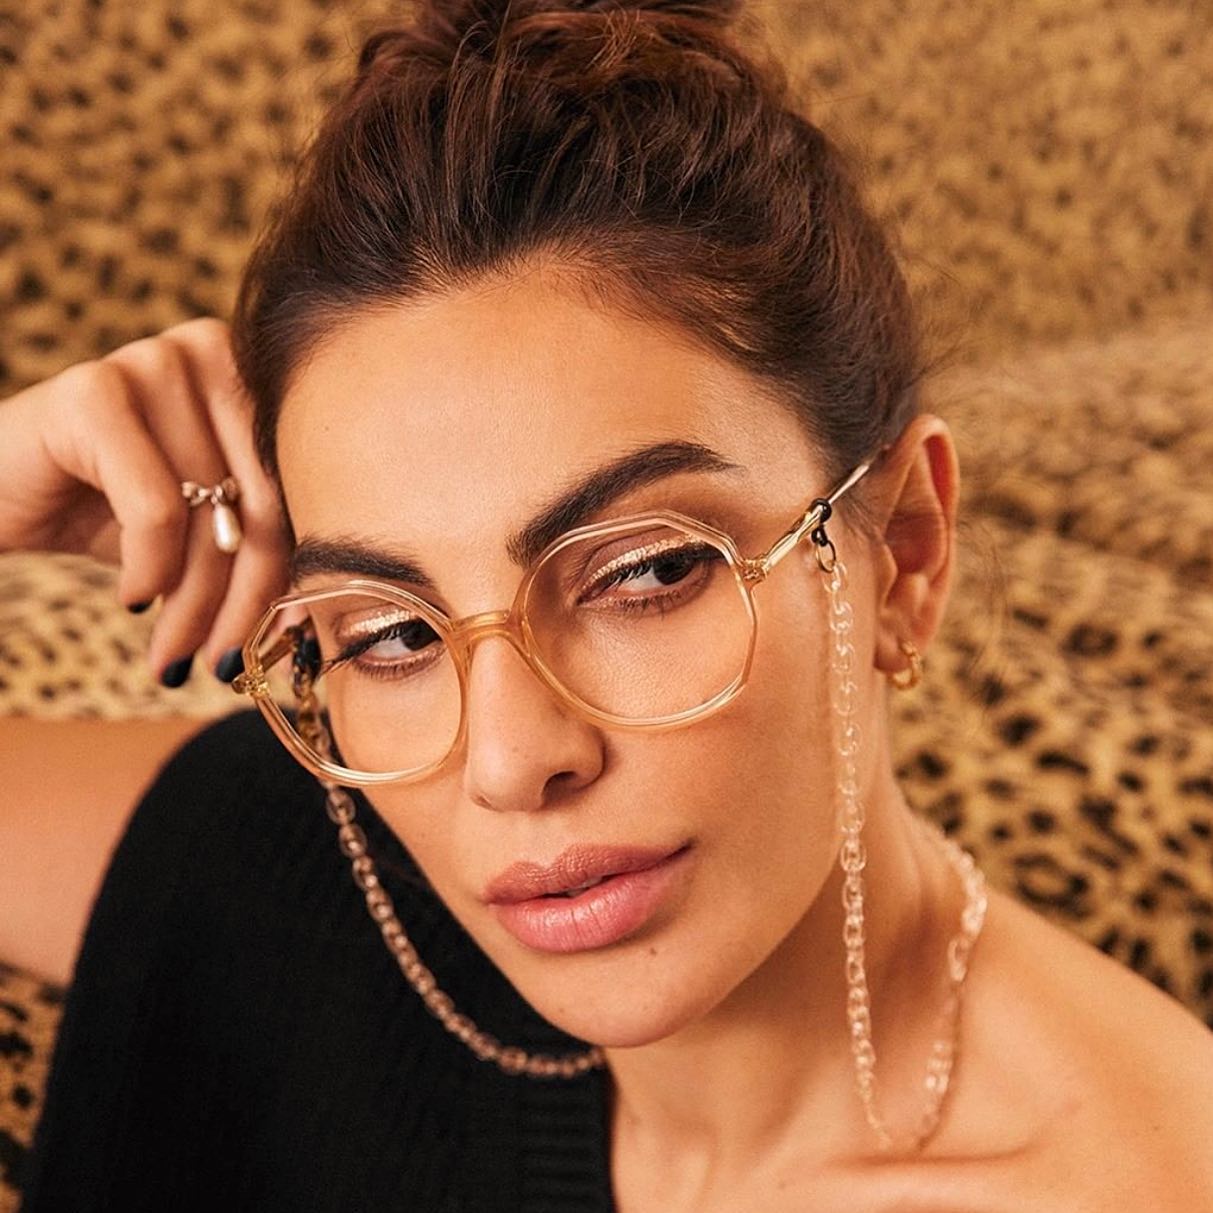 Discover our new range of optical styles and chains ⚡️⚡️⚡️#manycolors #available #freshness #boldness #frames #crytal #peach #designer #glasses #accessories #shoplocal #enjoylocal